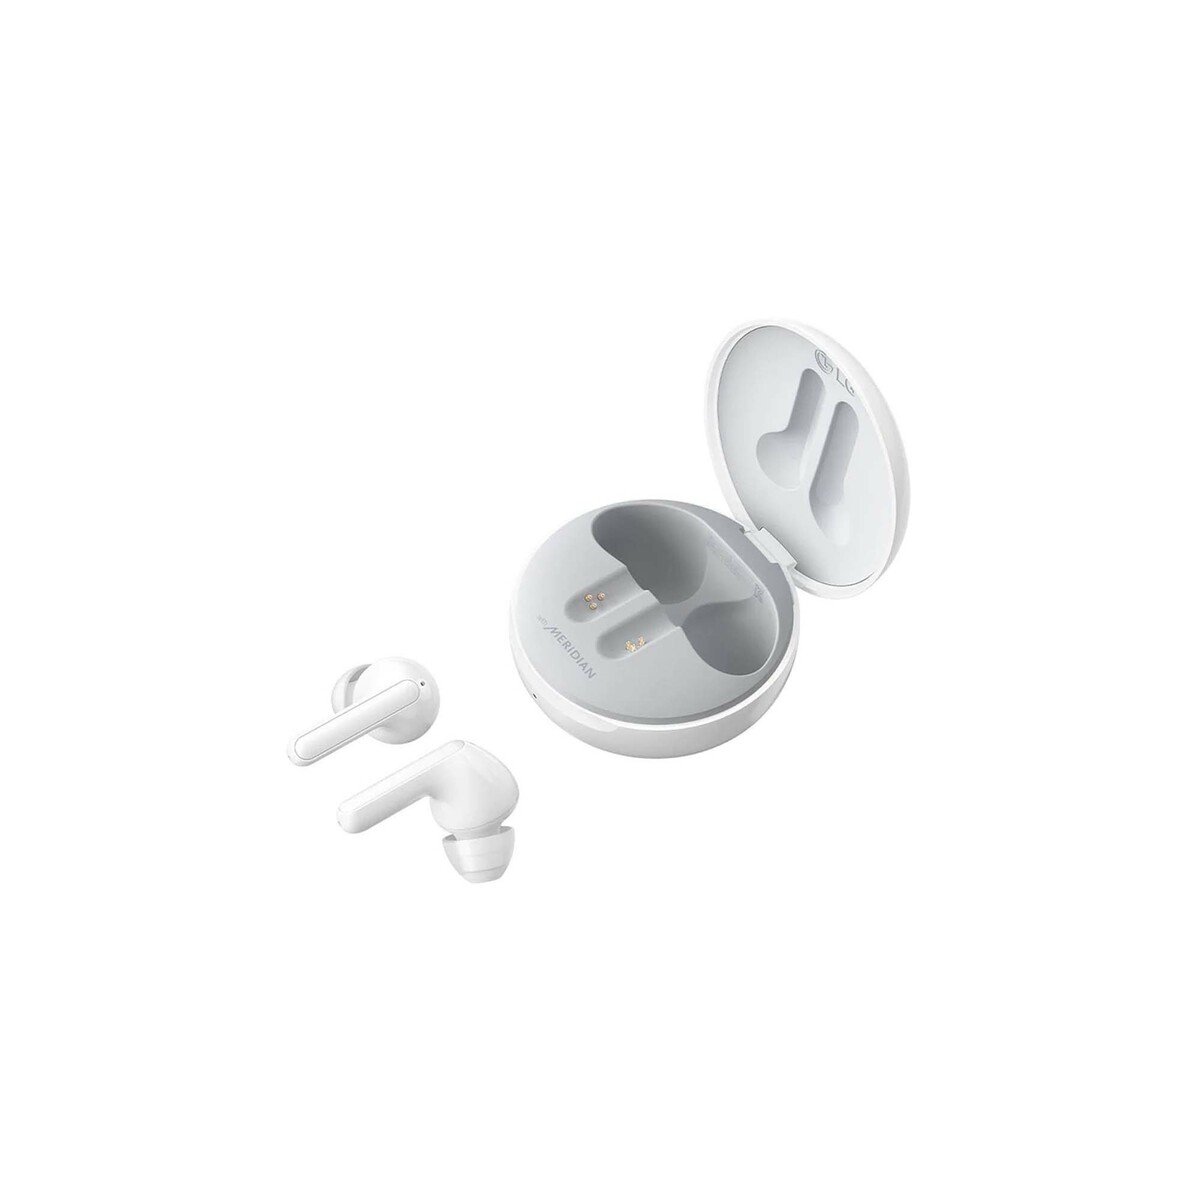 LG Tone Free HBS-FN6 Wireless Earbuds White